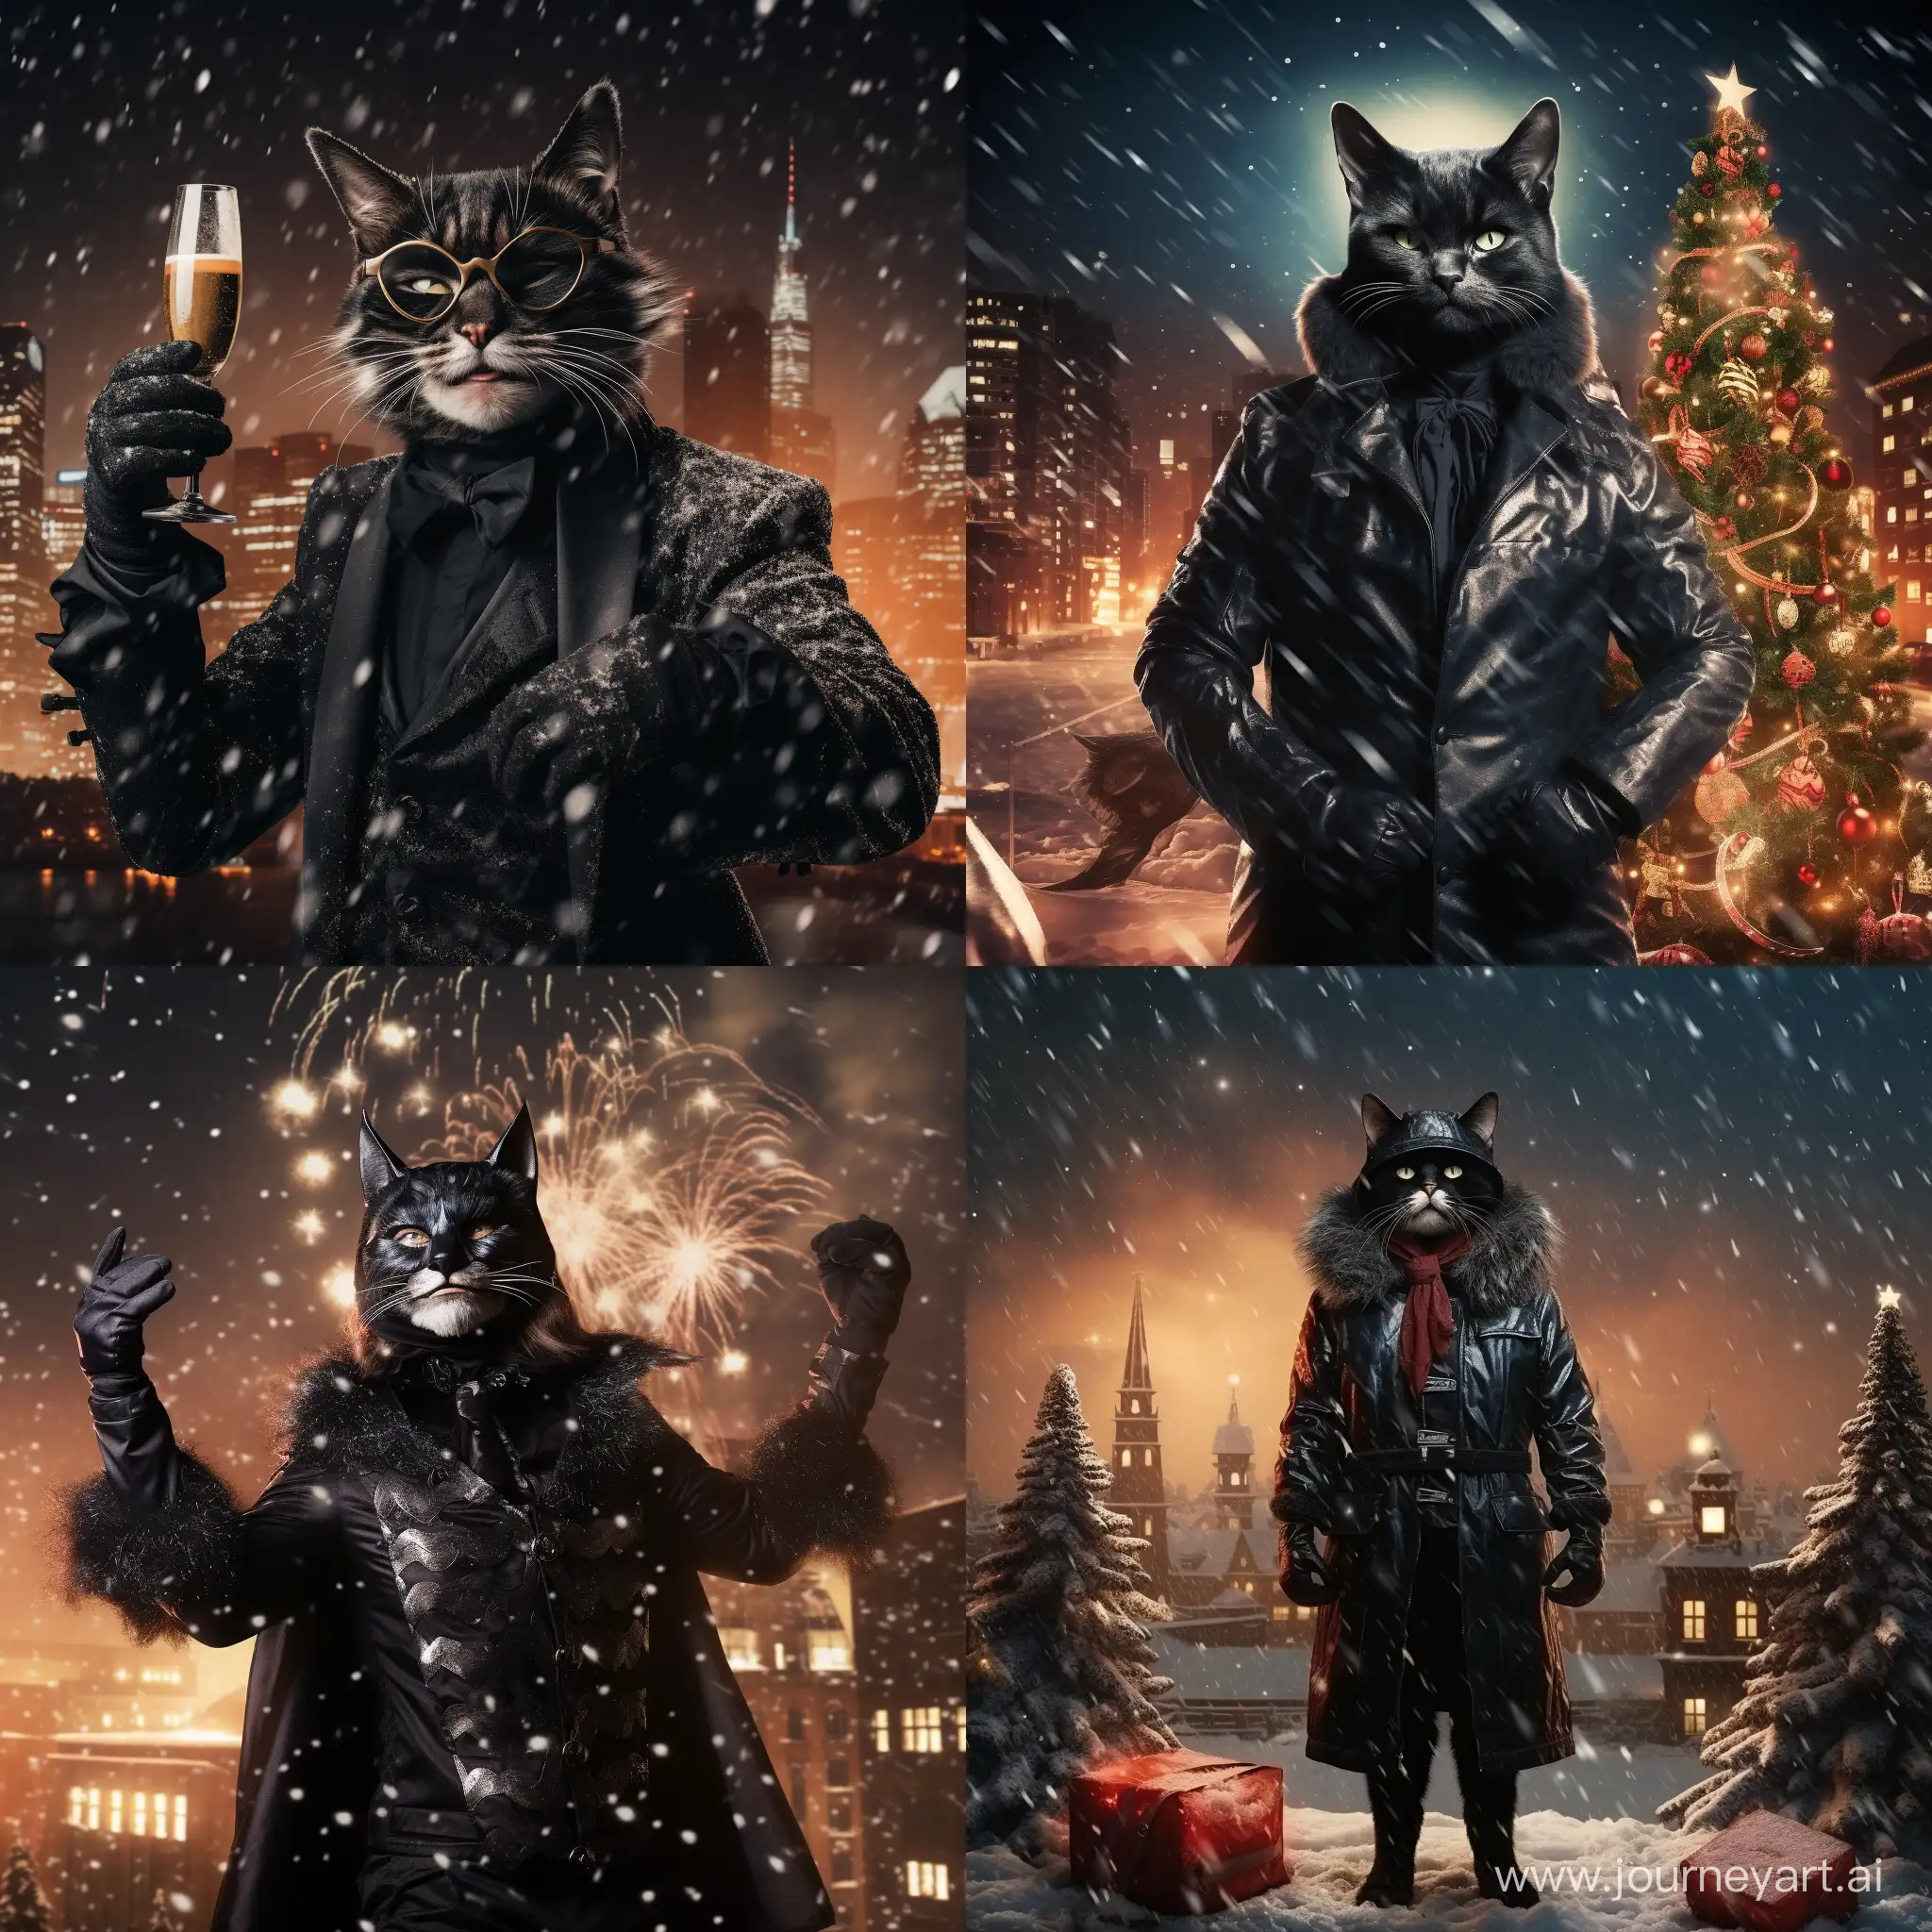 Catman-Celebrates-New-Year-Amidst-Festive-Fireworks-and-Snow-with-Christmas-Tree